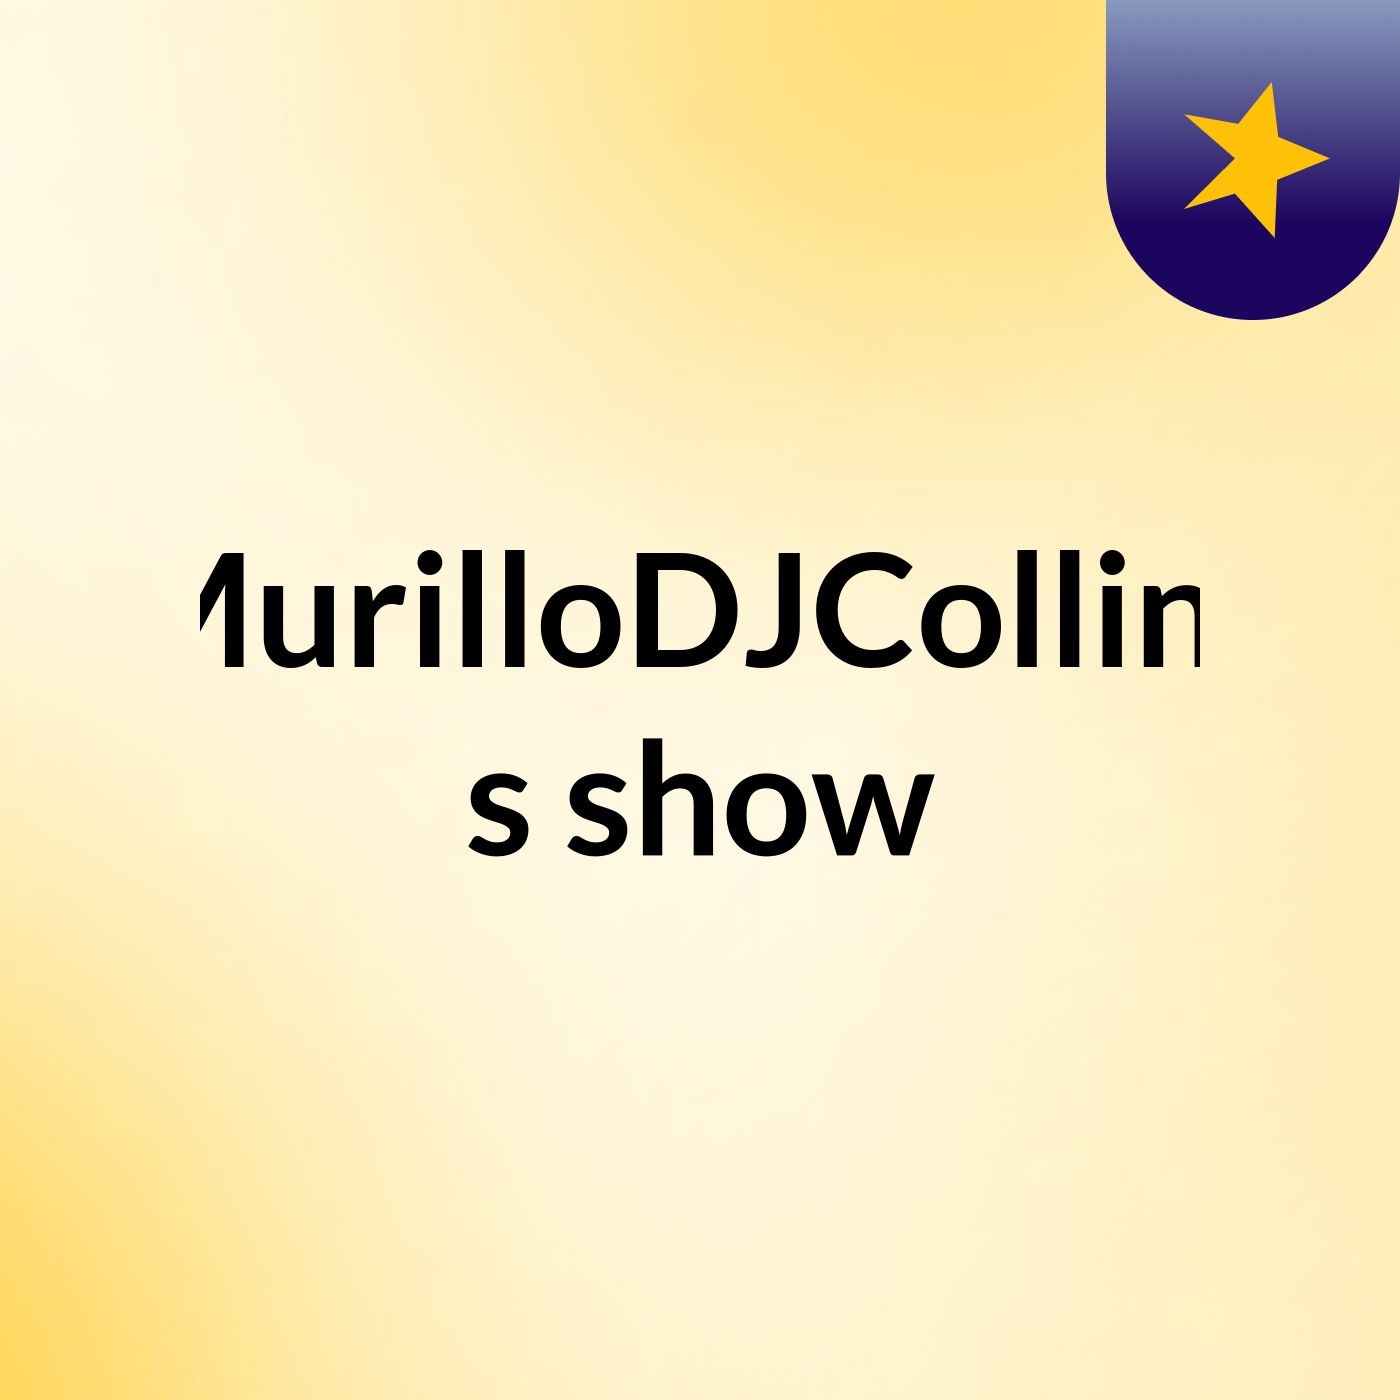 MurilloDJCollins's show